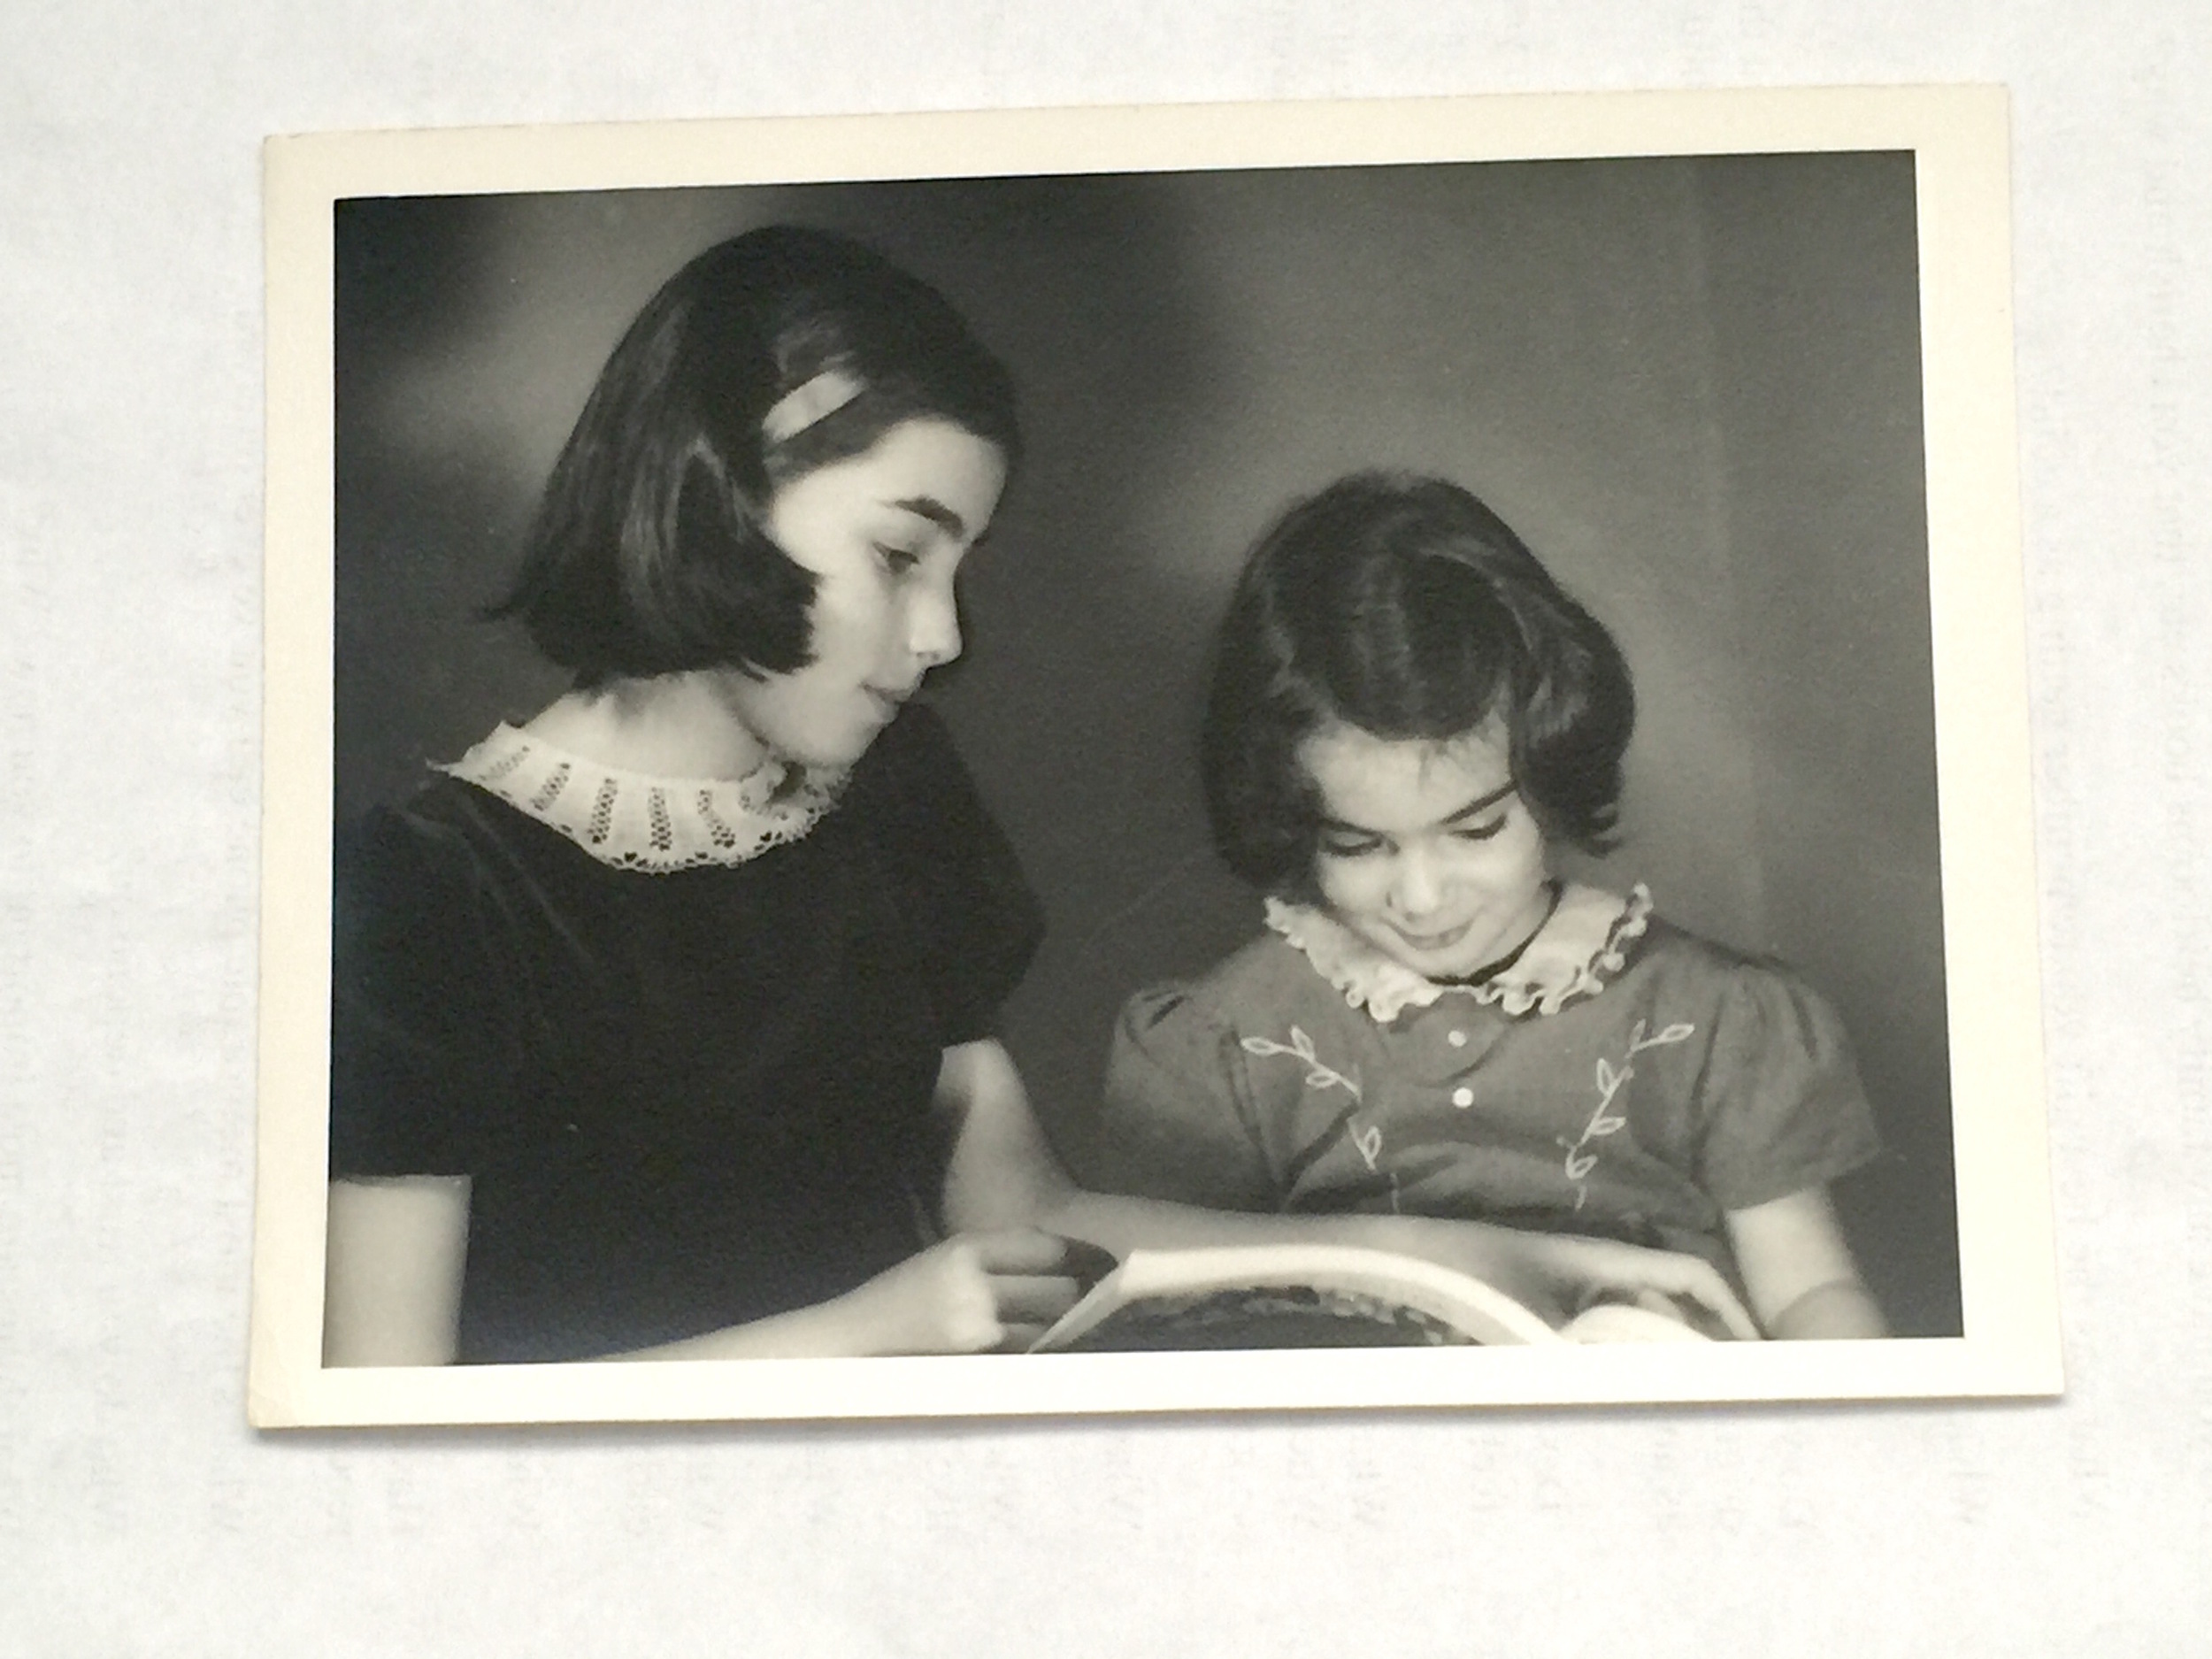  Siblings born during World War II, Ruth was the European child and Margaret Rose was the American child.    memory prompt:  Do you have a sibling whose childhood differed from yours?  